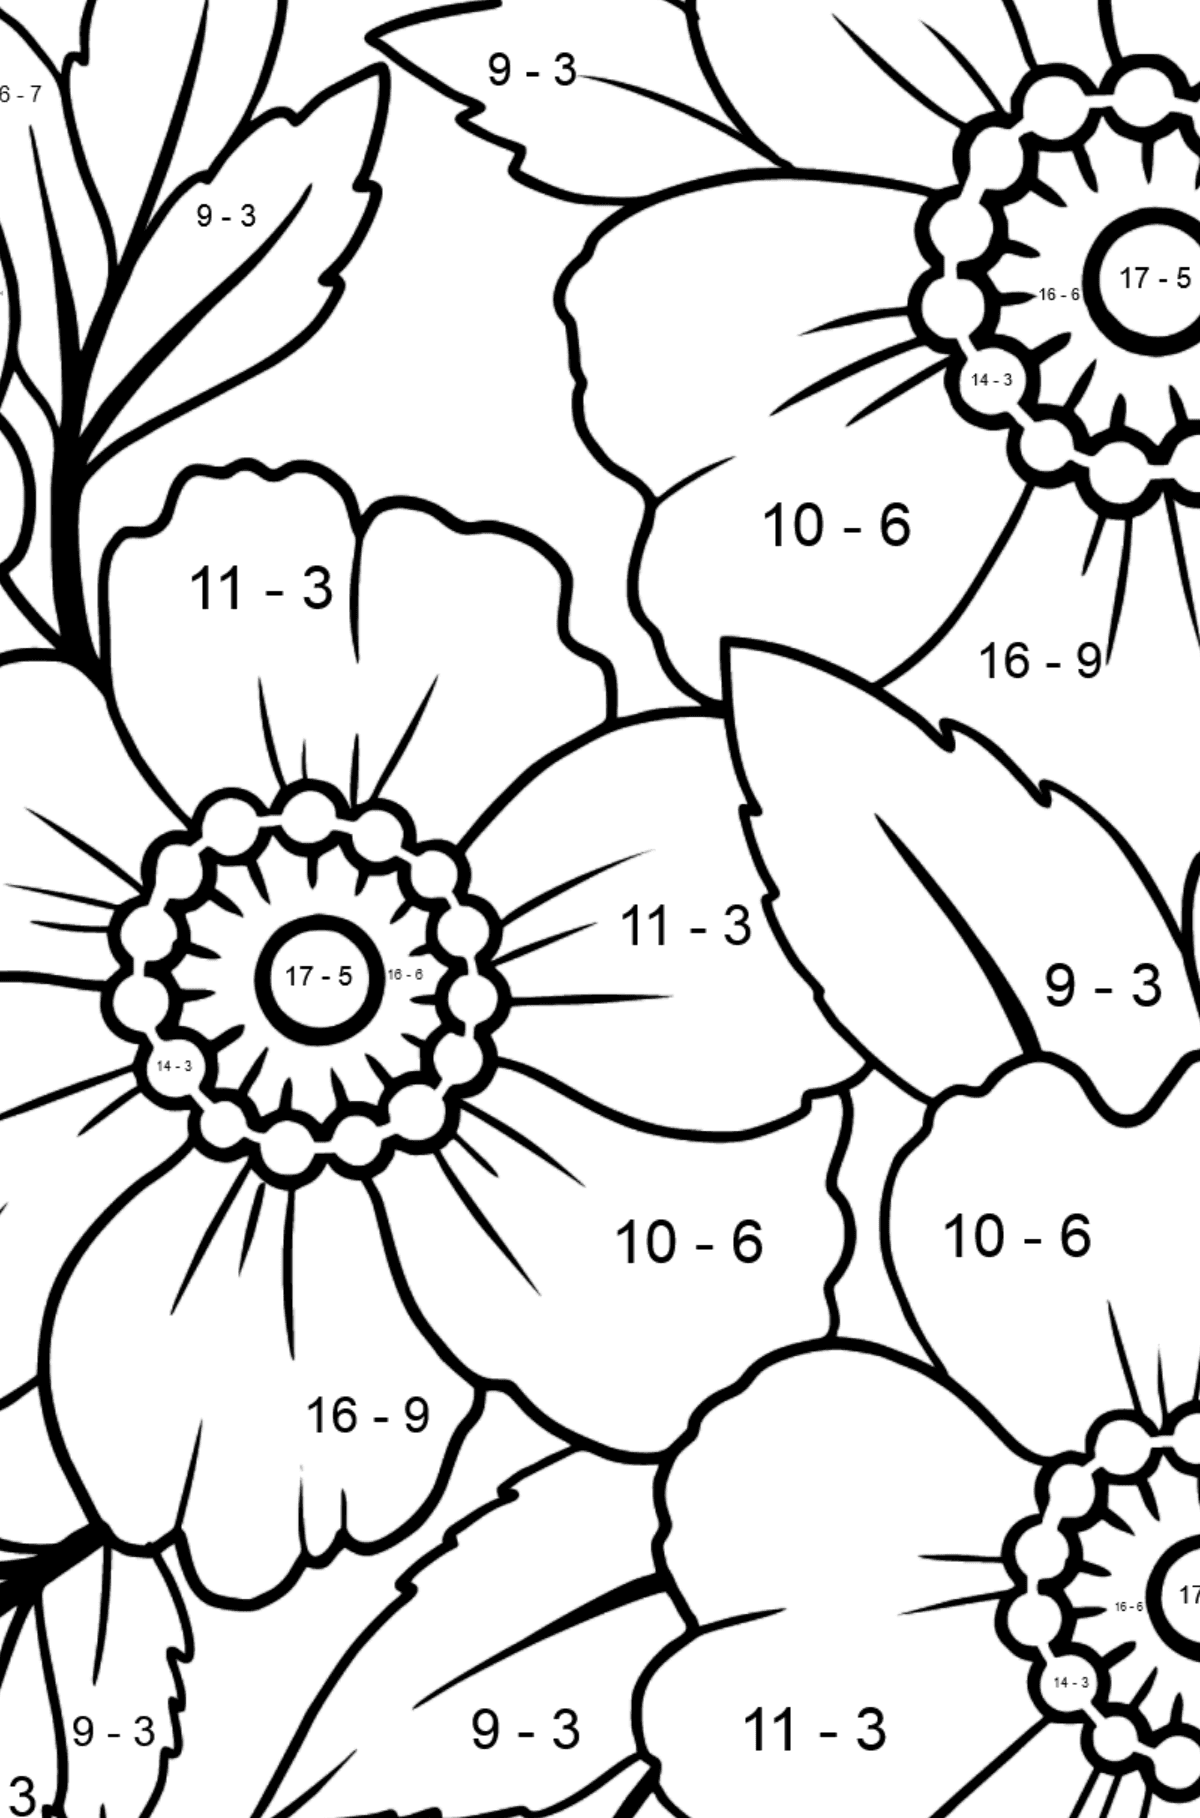 Flower Coloring Page (A4) - A Japanese Anemone with Pink Petals - Math Coloring - Subtraction for Kids